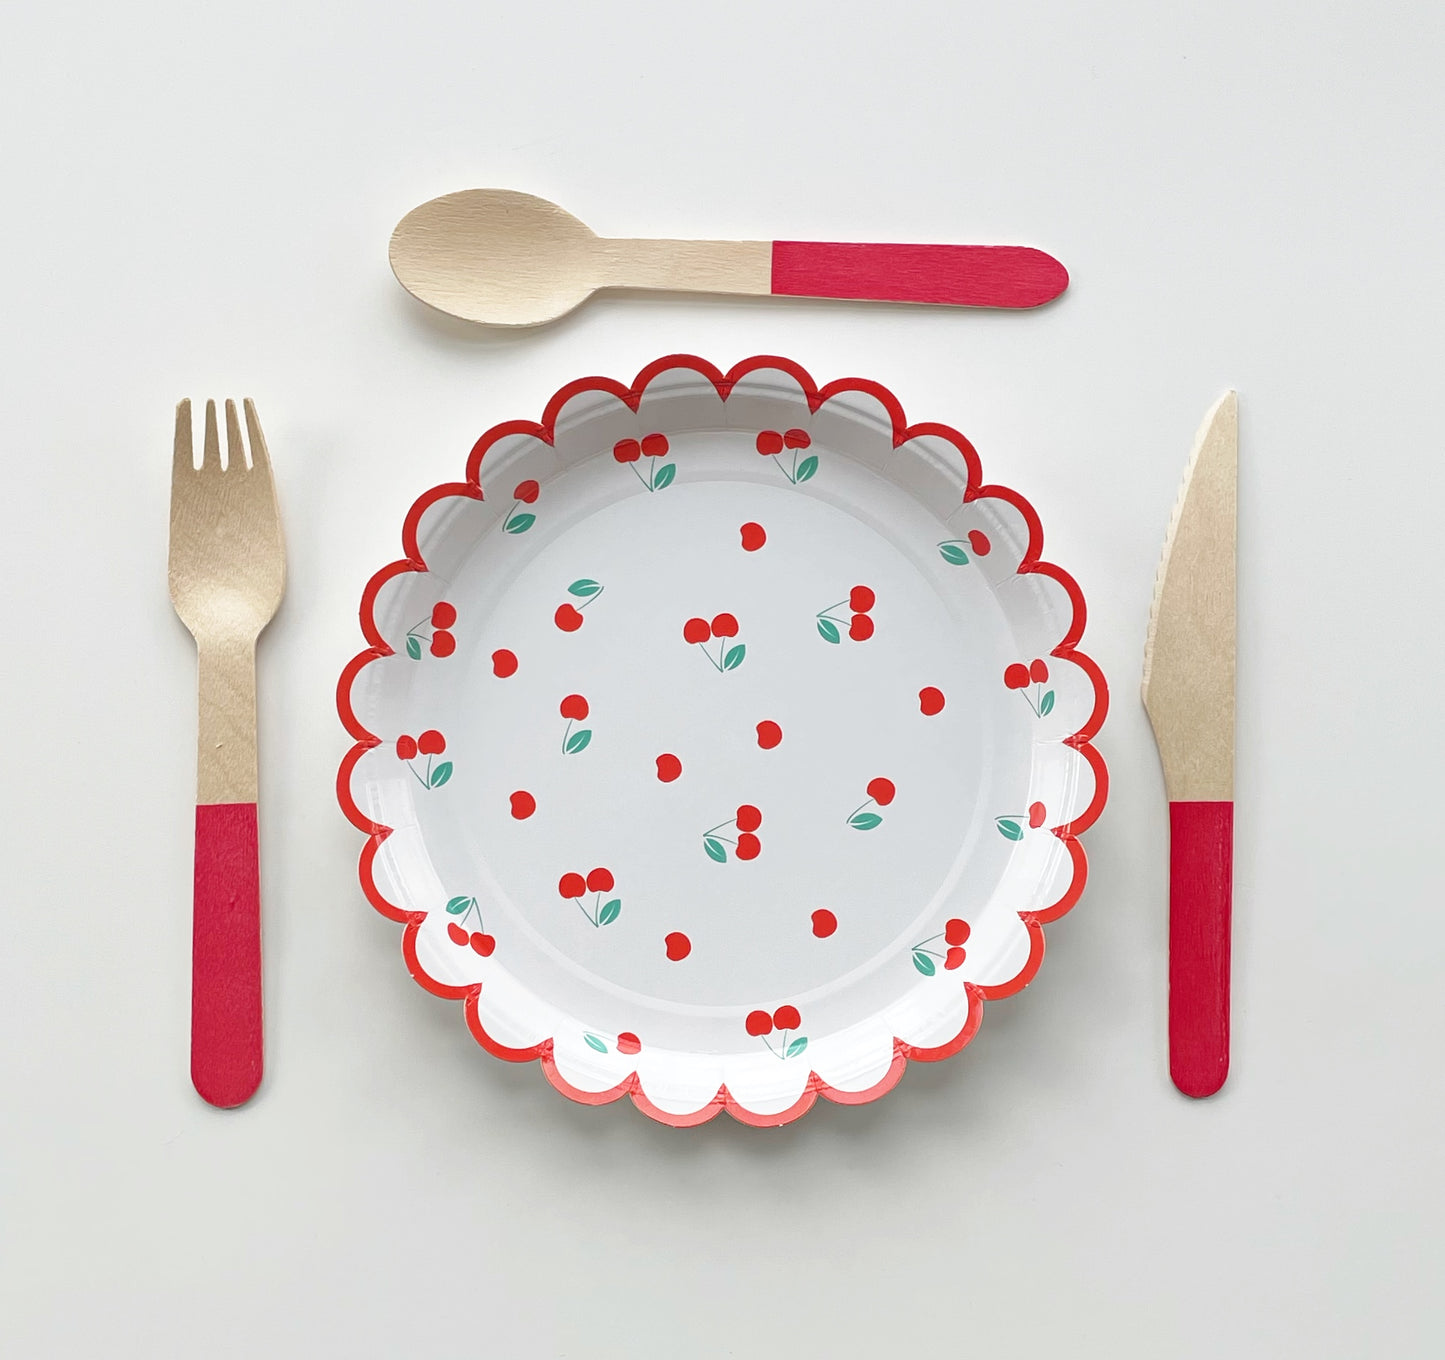 The small Cherry paper party plates have a red scalloped edge. The cherry pattern includes red, white and green colours.  Red dipped wooden utensils are arranged around the plate. This cutlery set includes knives, spoons and forks.